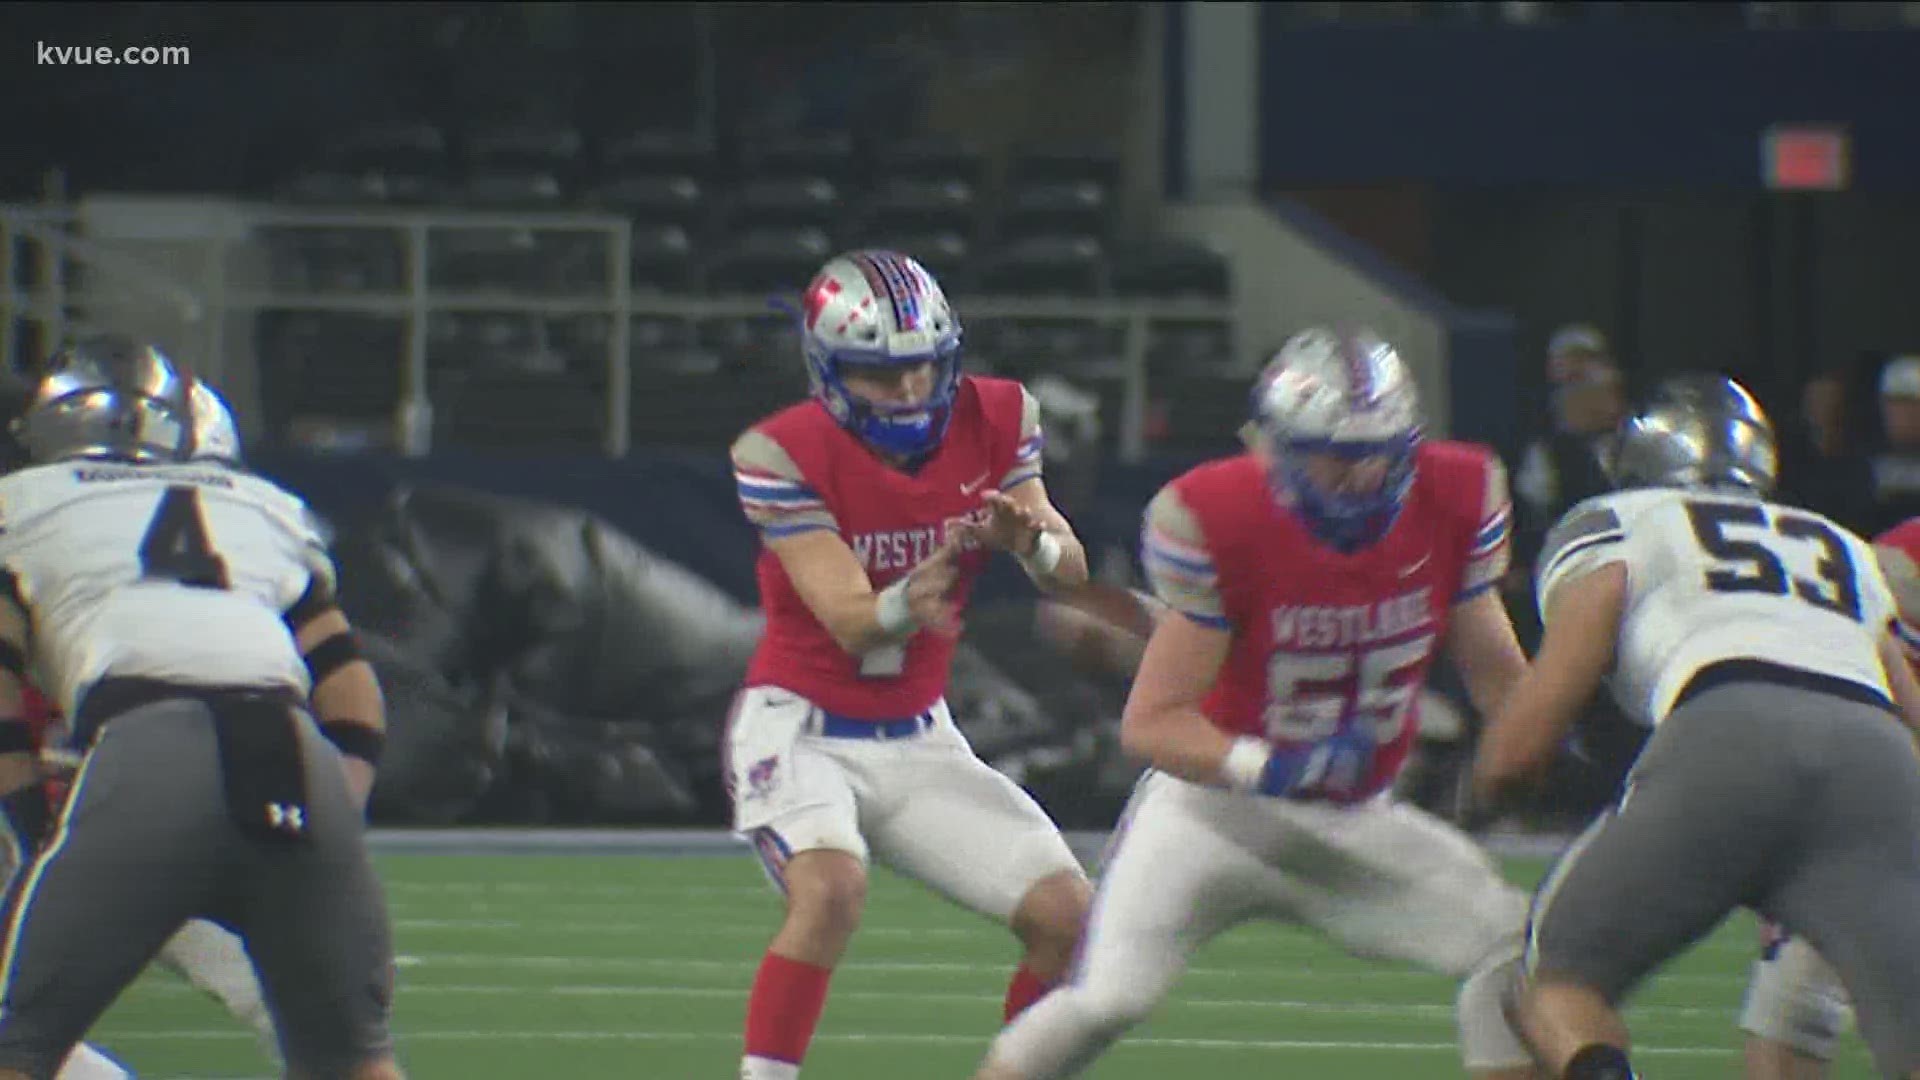 The UIL is trying to figure out a timeline for when high school sports can make a comeback, but nothing has been approved.